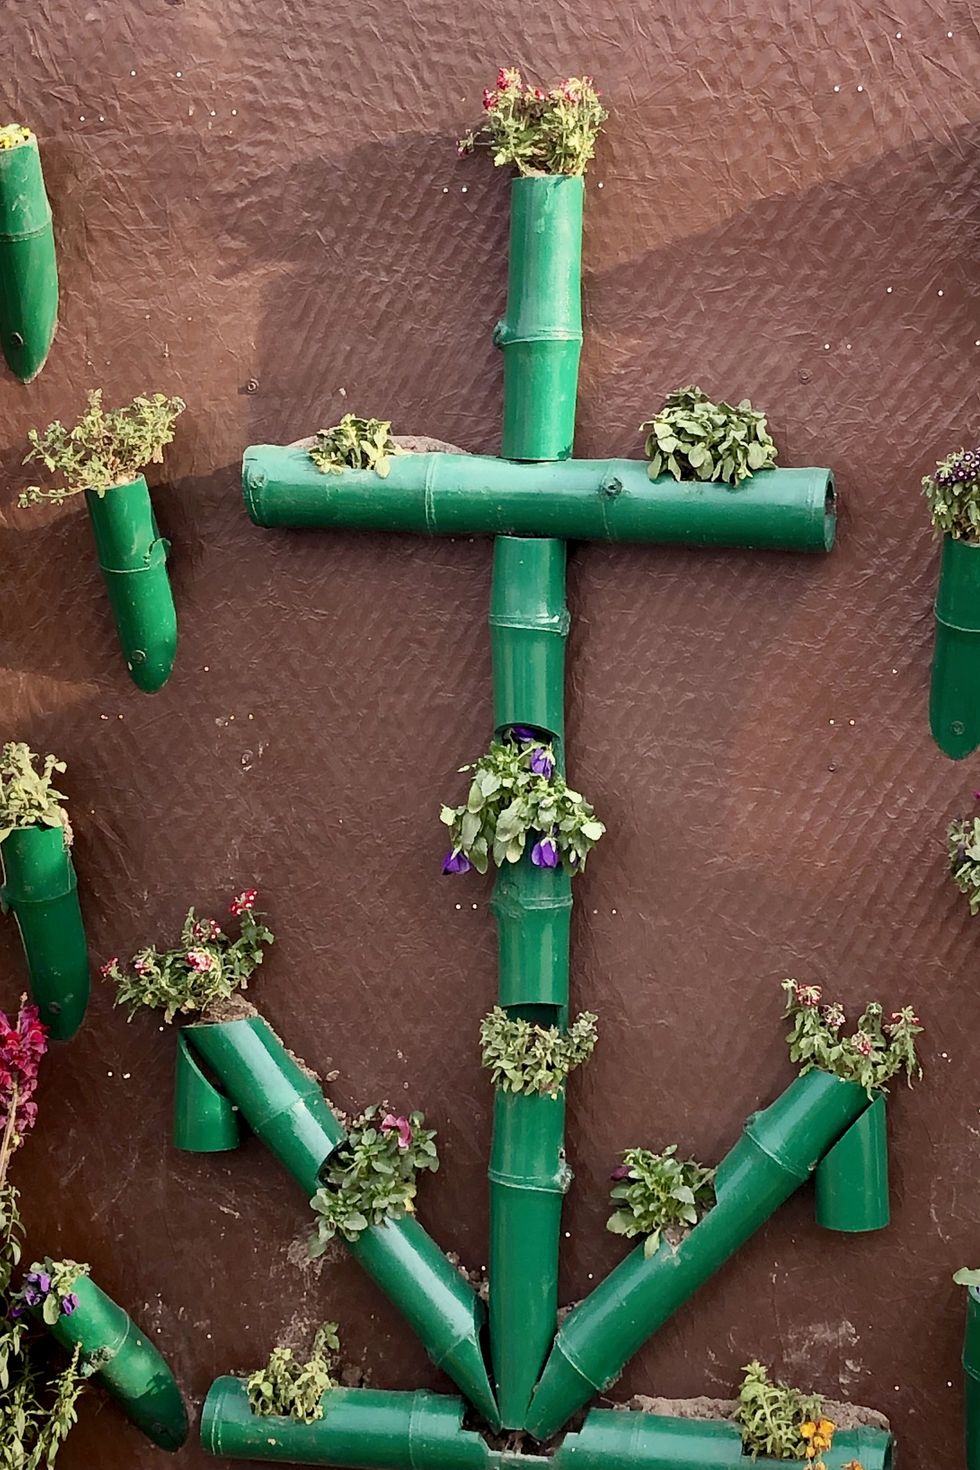 Ideas for vertical garden wall planters from plastic drainage pipes